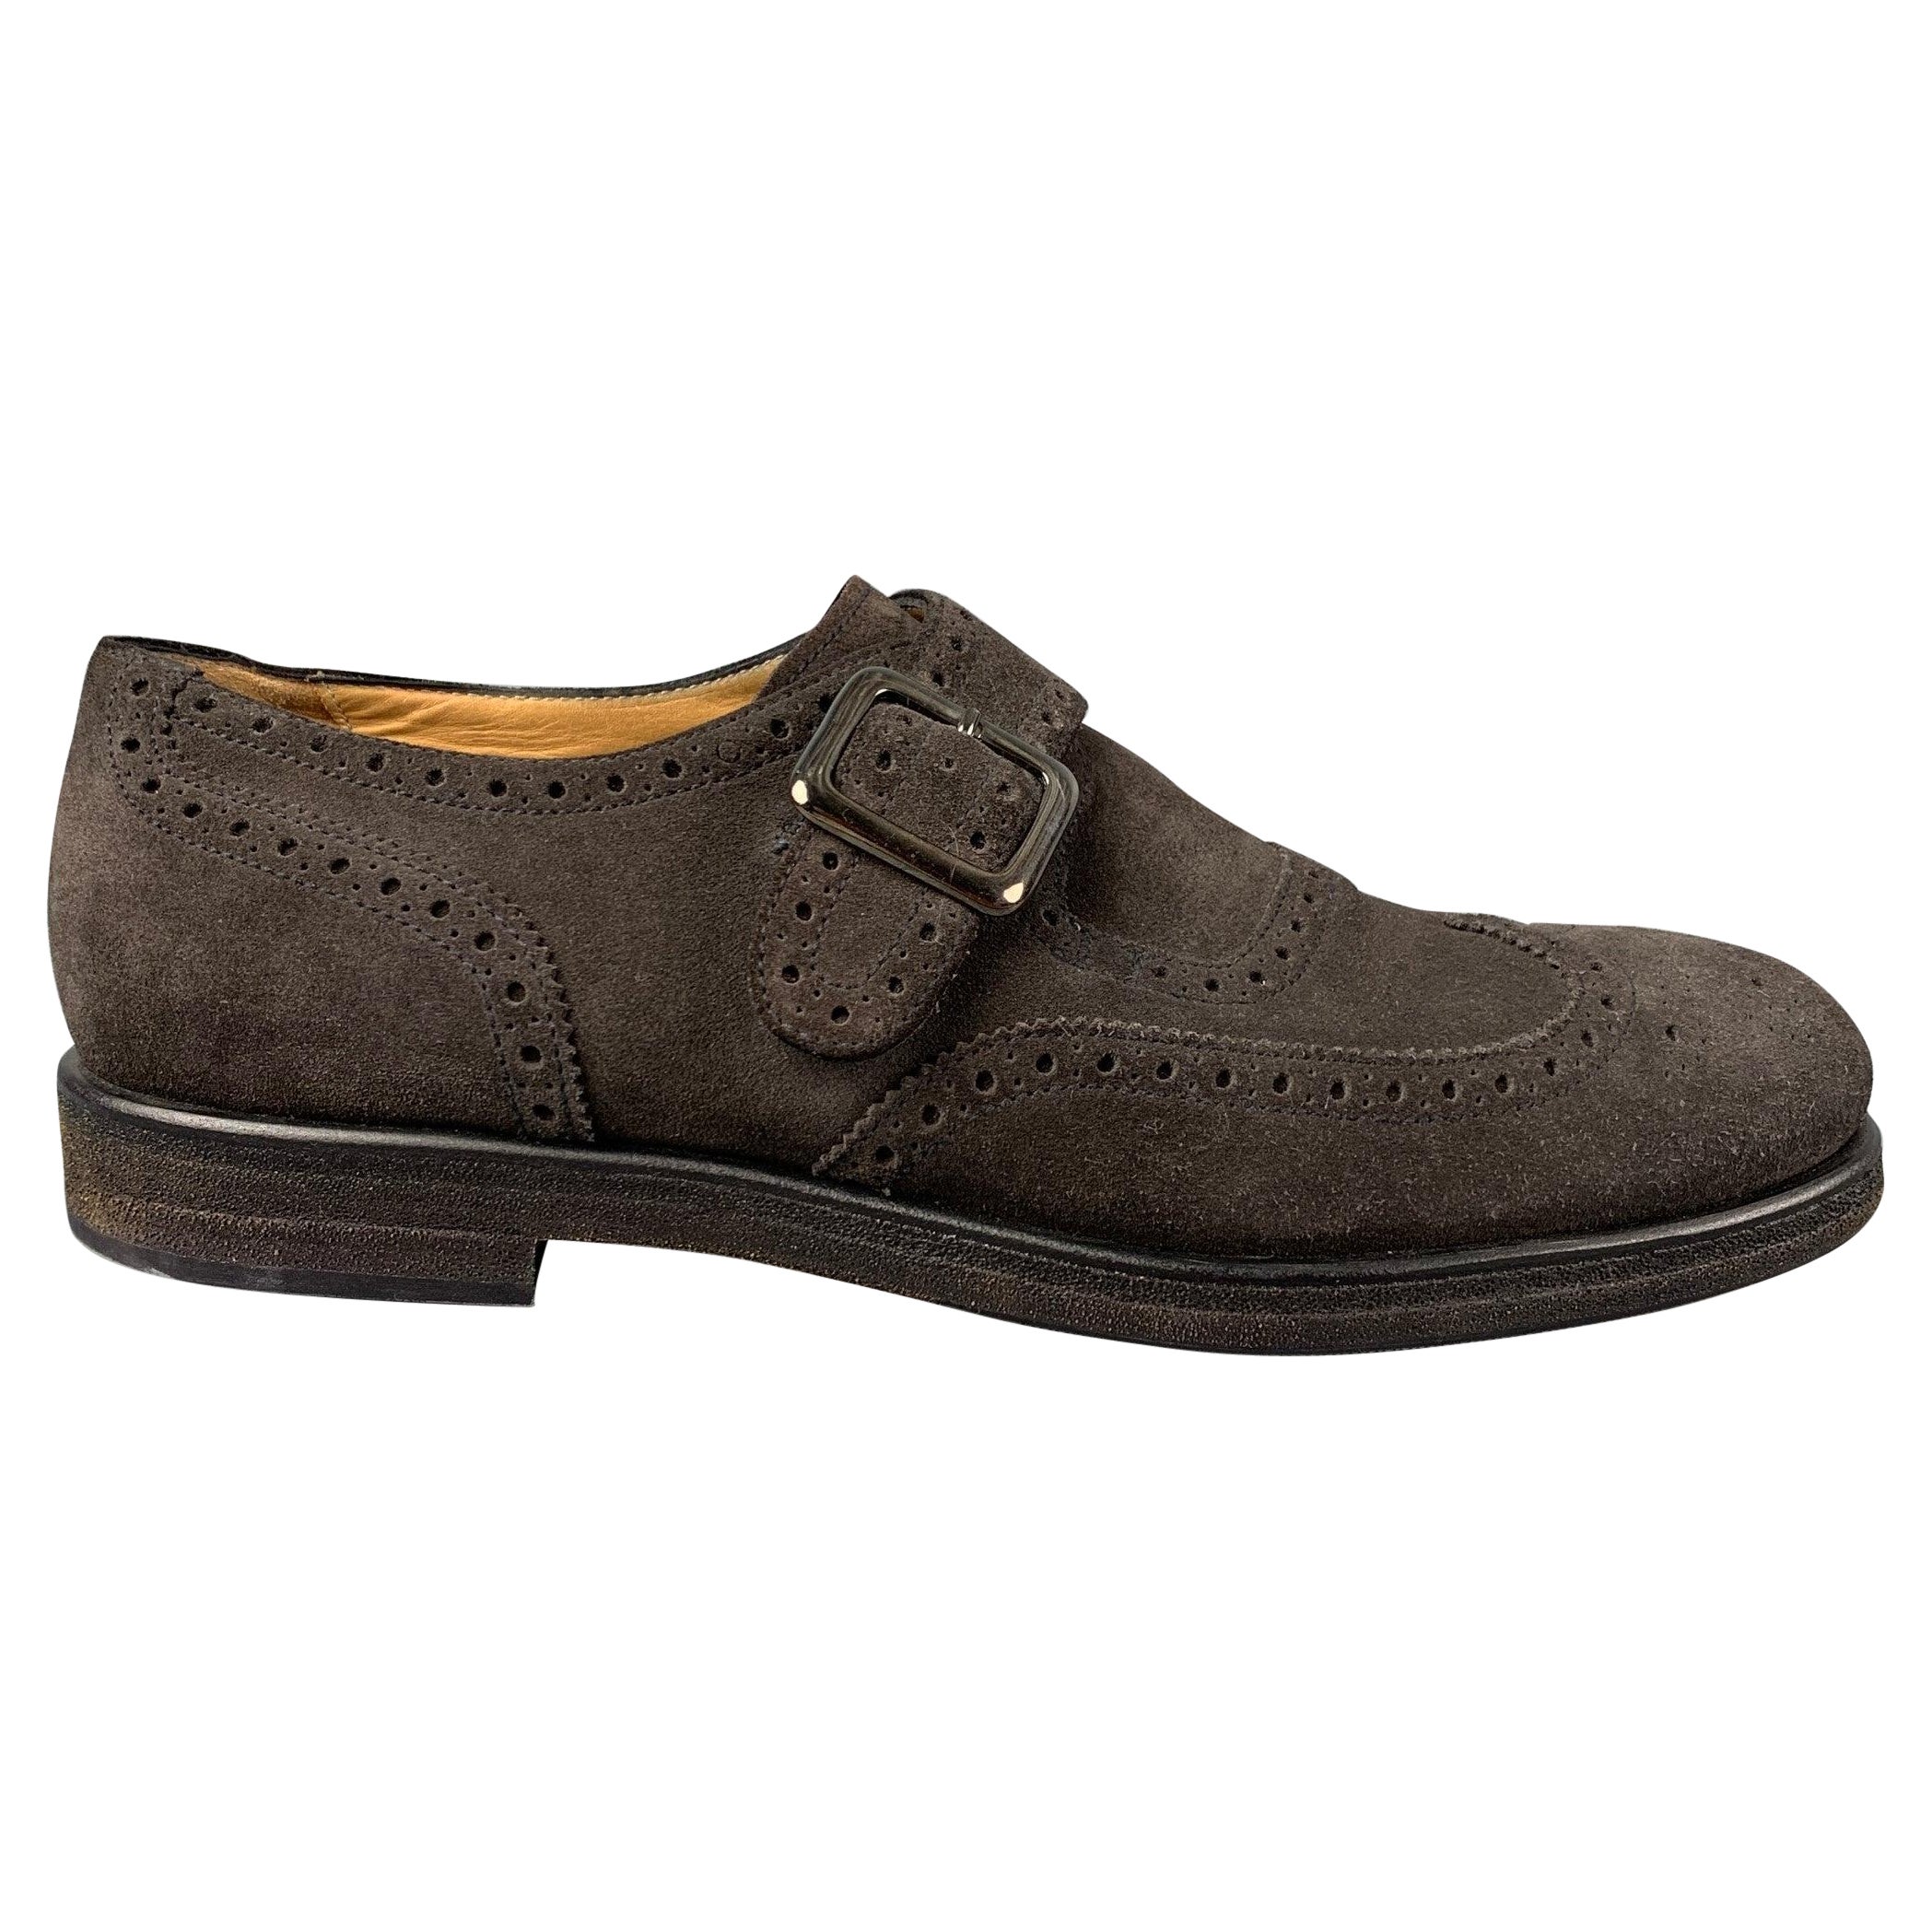 GIORGIO ARMANI Size 11 Brown Perforated Leather Monk Strap Loafers For Sale